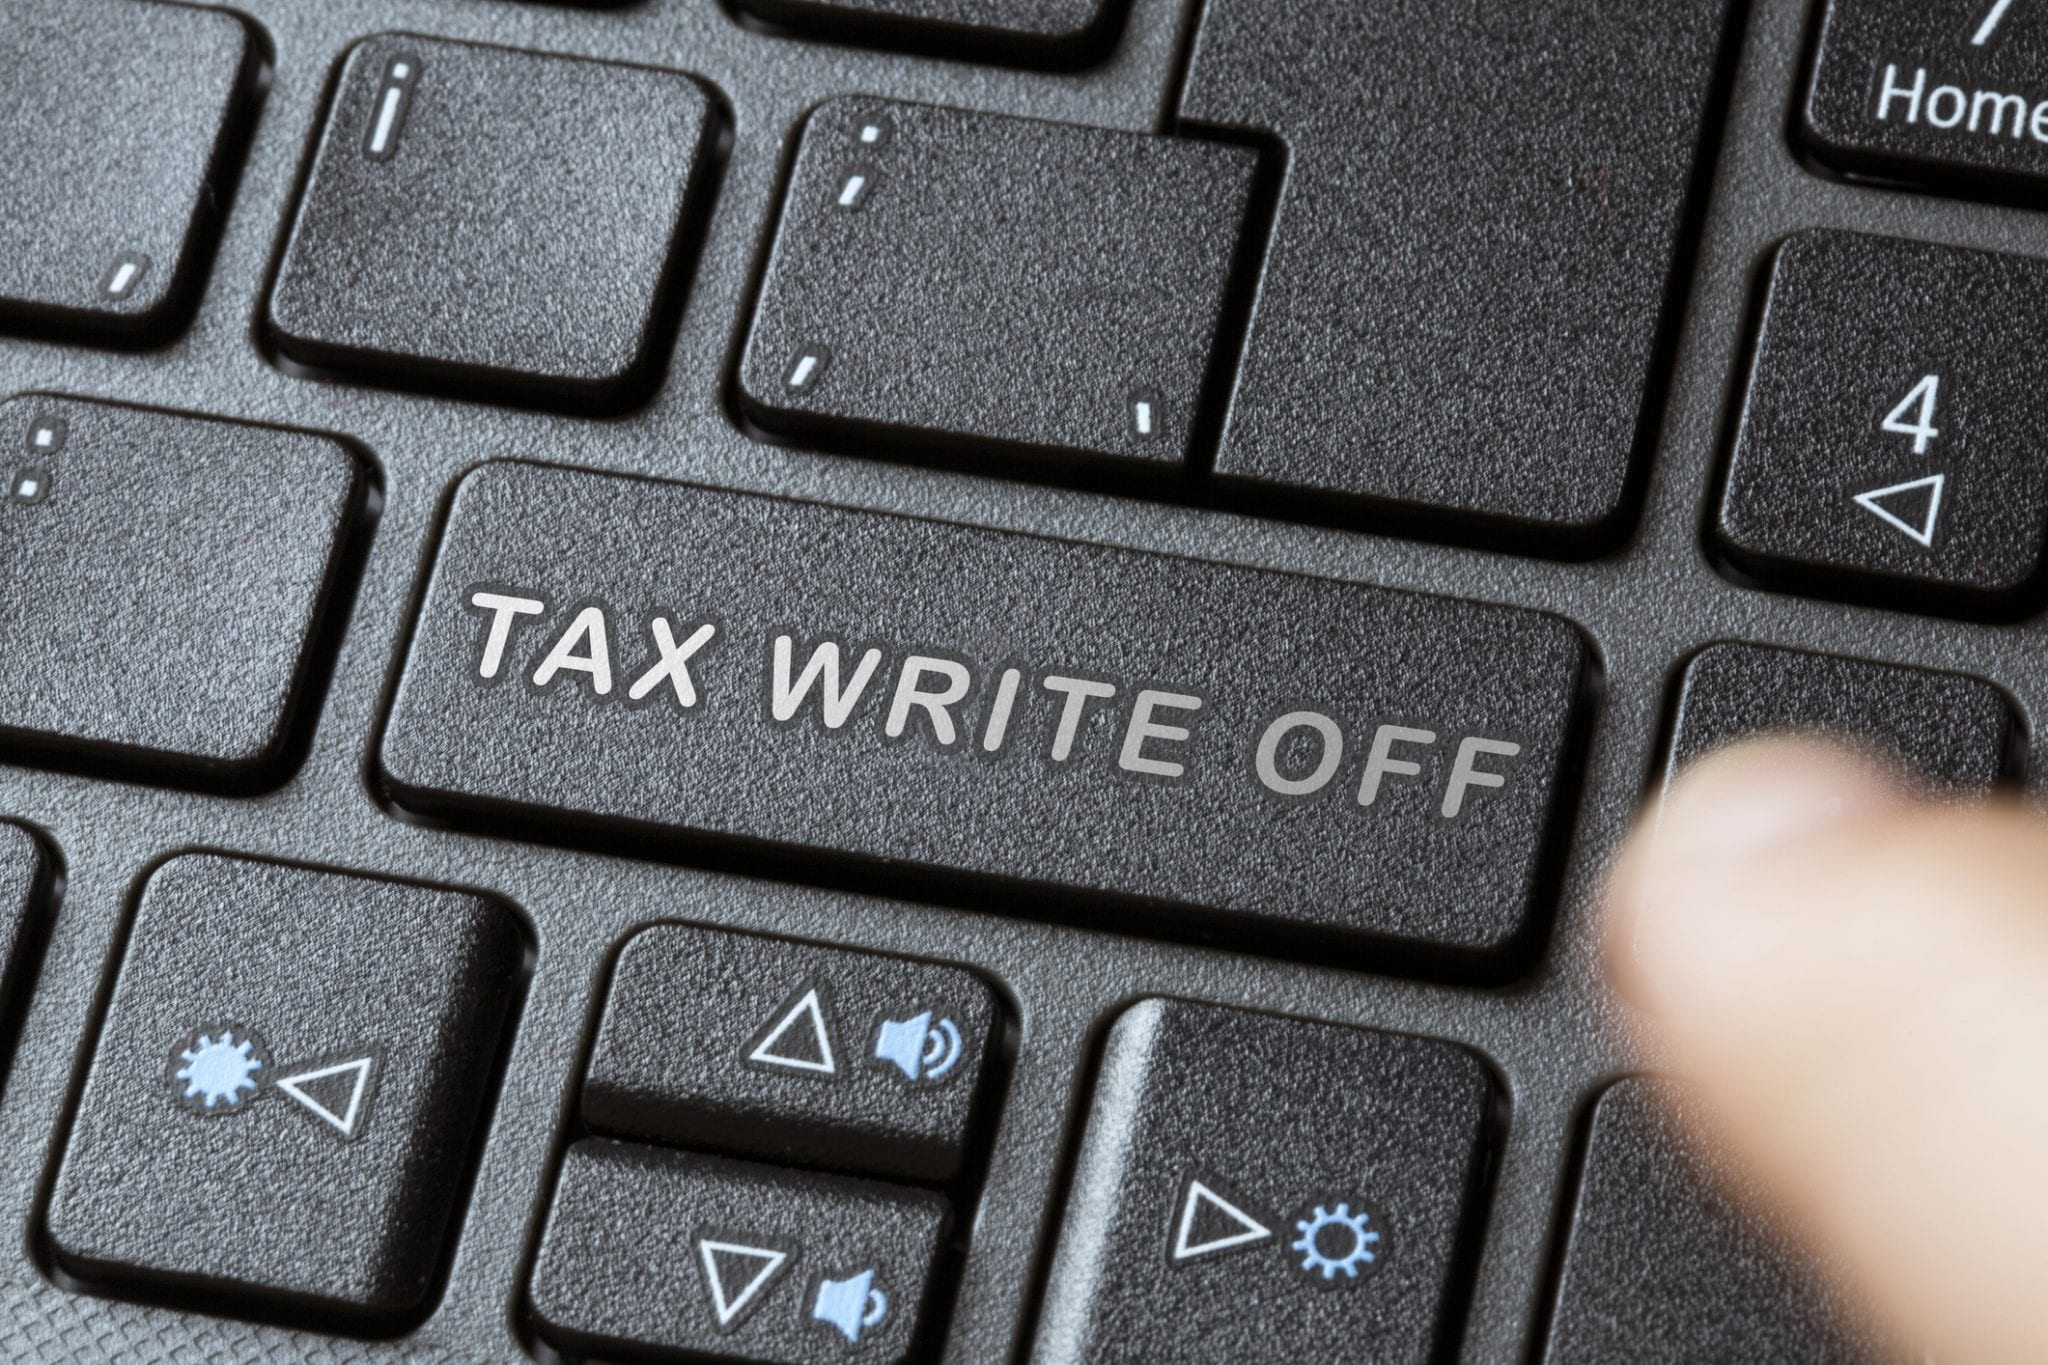 Keyboard with phrase "Tax Write Off" on the return button for the CARES Act generator deduction.